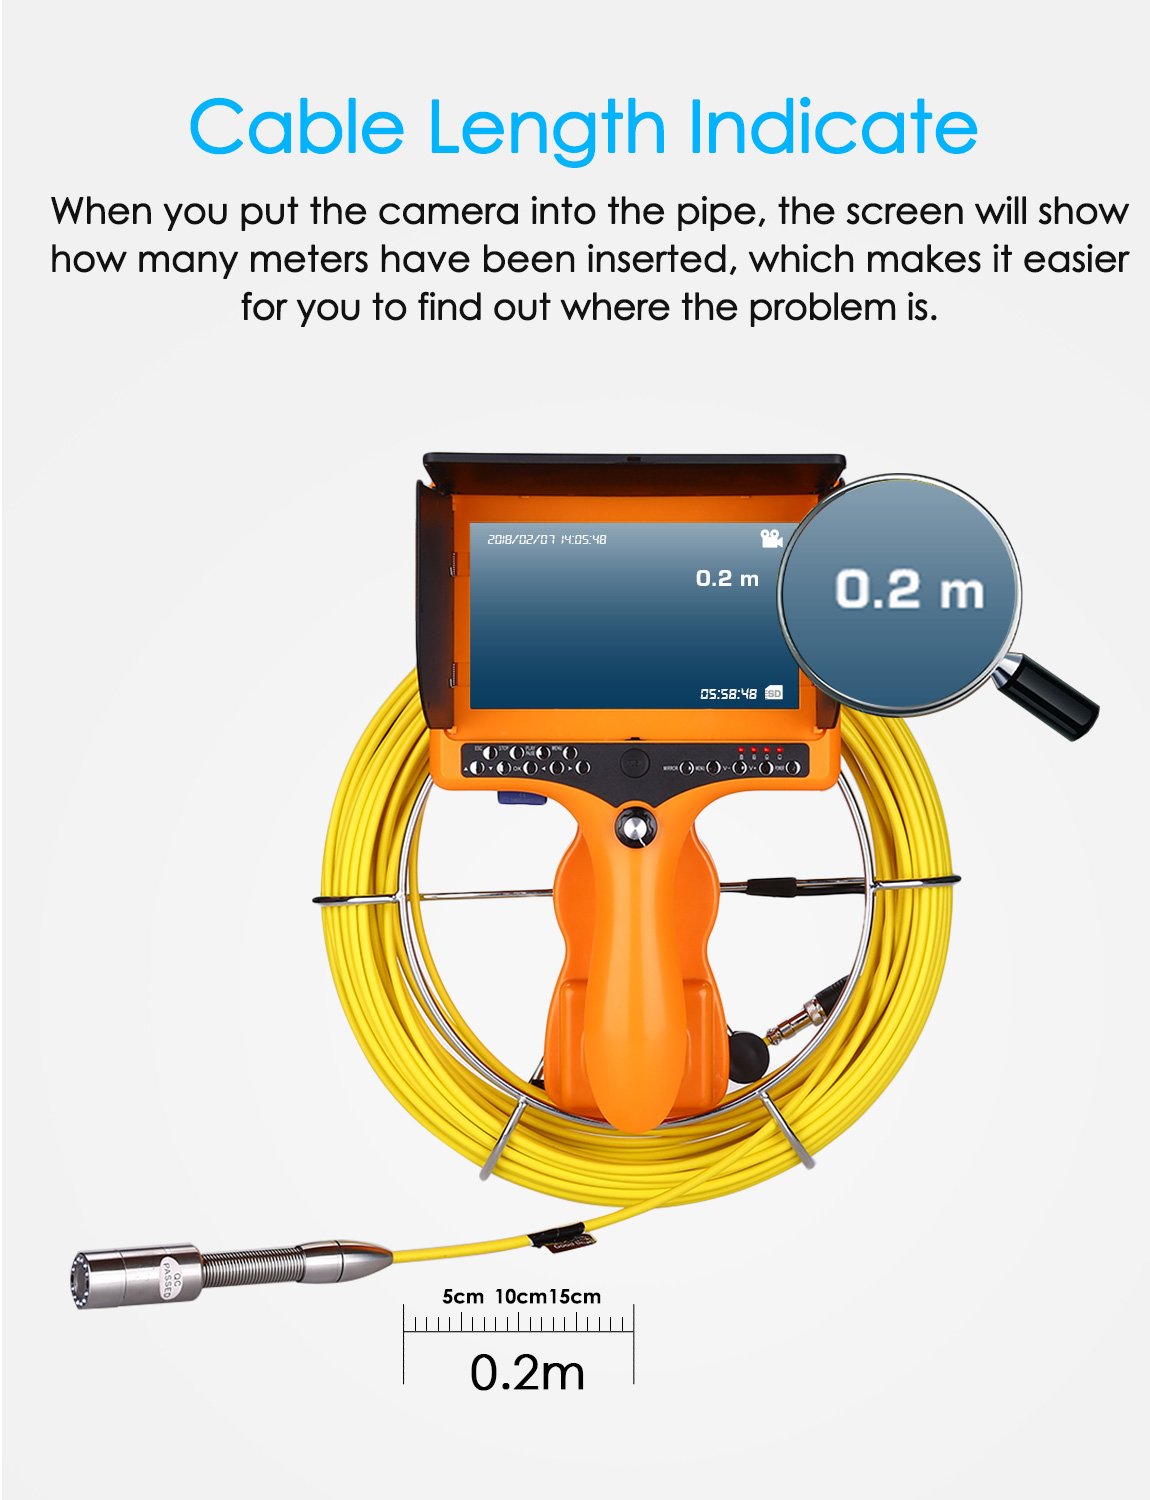 TVBTech, Video Pipe Inspection Camera 23mm/20m cable, 7 monitor w/DVR  feature - Adeptor AS